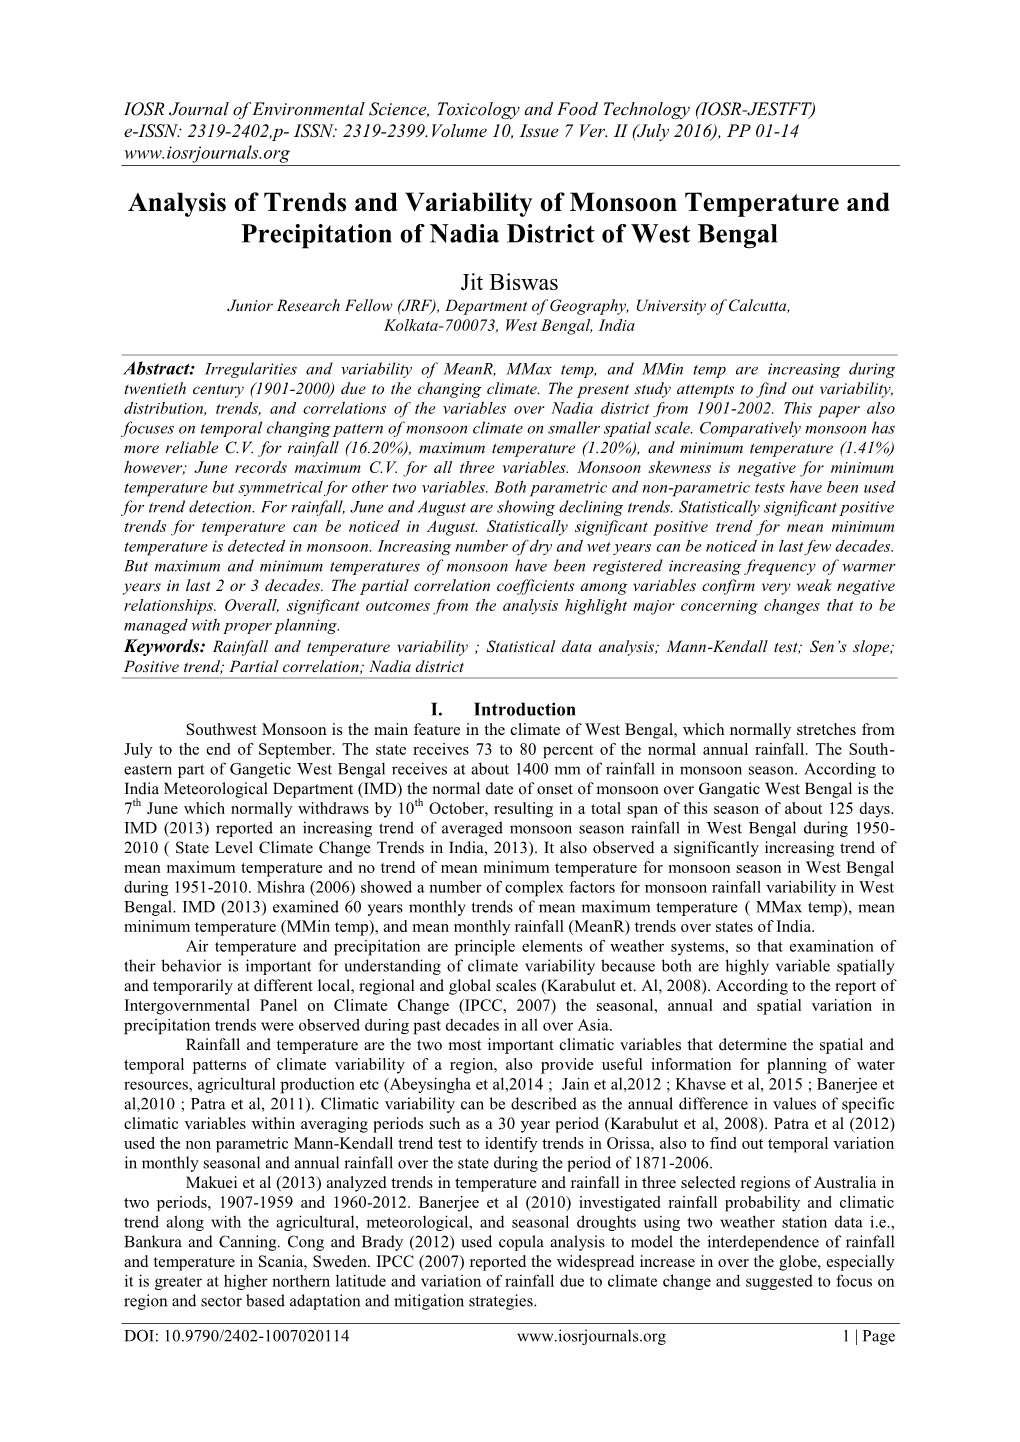 Analysis of Trends and Variability of Monsoon Temperature and Precipitation of Nadia District of West Bengal